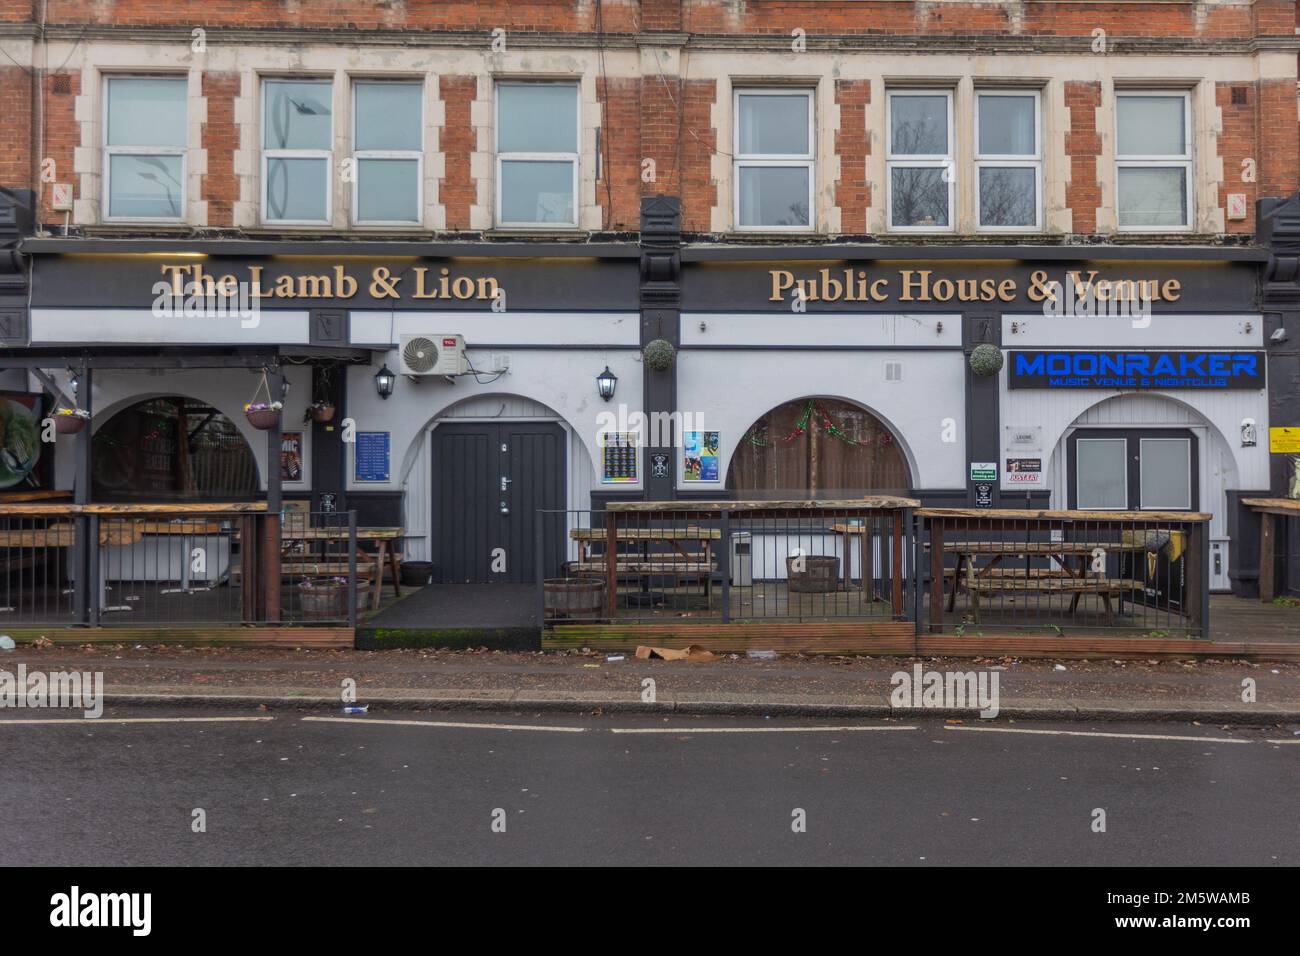 Westcliff on Sea, UK. 31st Dec, 2022. The Lamb and Lion will remain shut until the funeral of a customer fatally attacked in the pub. David Peck died when he was attacked on the 23rd Dec 2022. Alfred Turner, 44, has been charged with murder, possession of an offensive weapon in a public place, and possession of a bladed article in a public place. He has been remanded in custody following a court appearance at Chelmsford Crown Court. Penelope Barritt/Alamy Live News Stock Photo